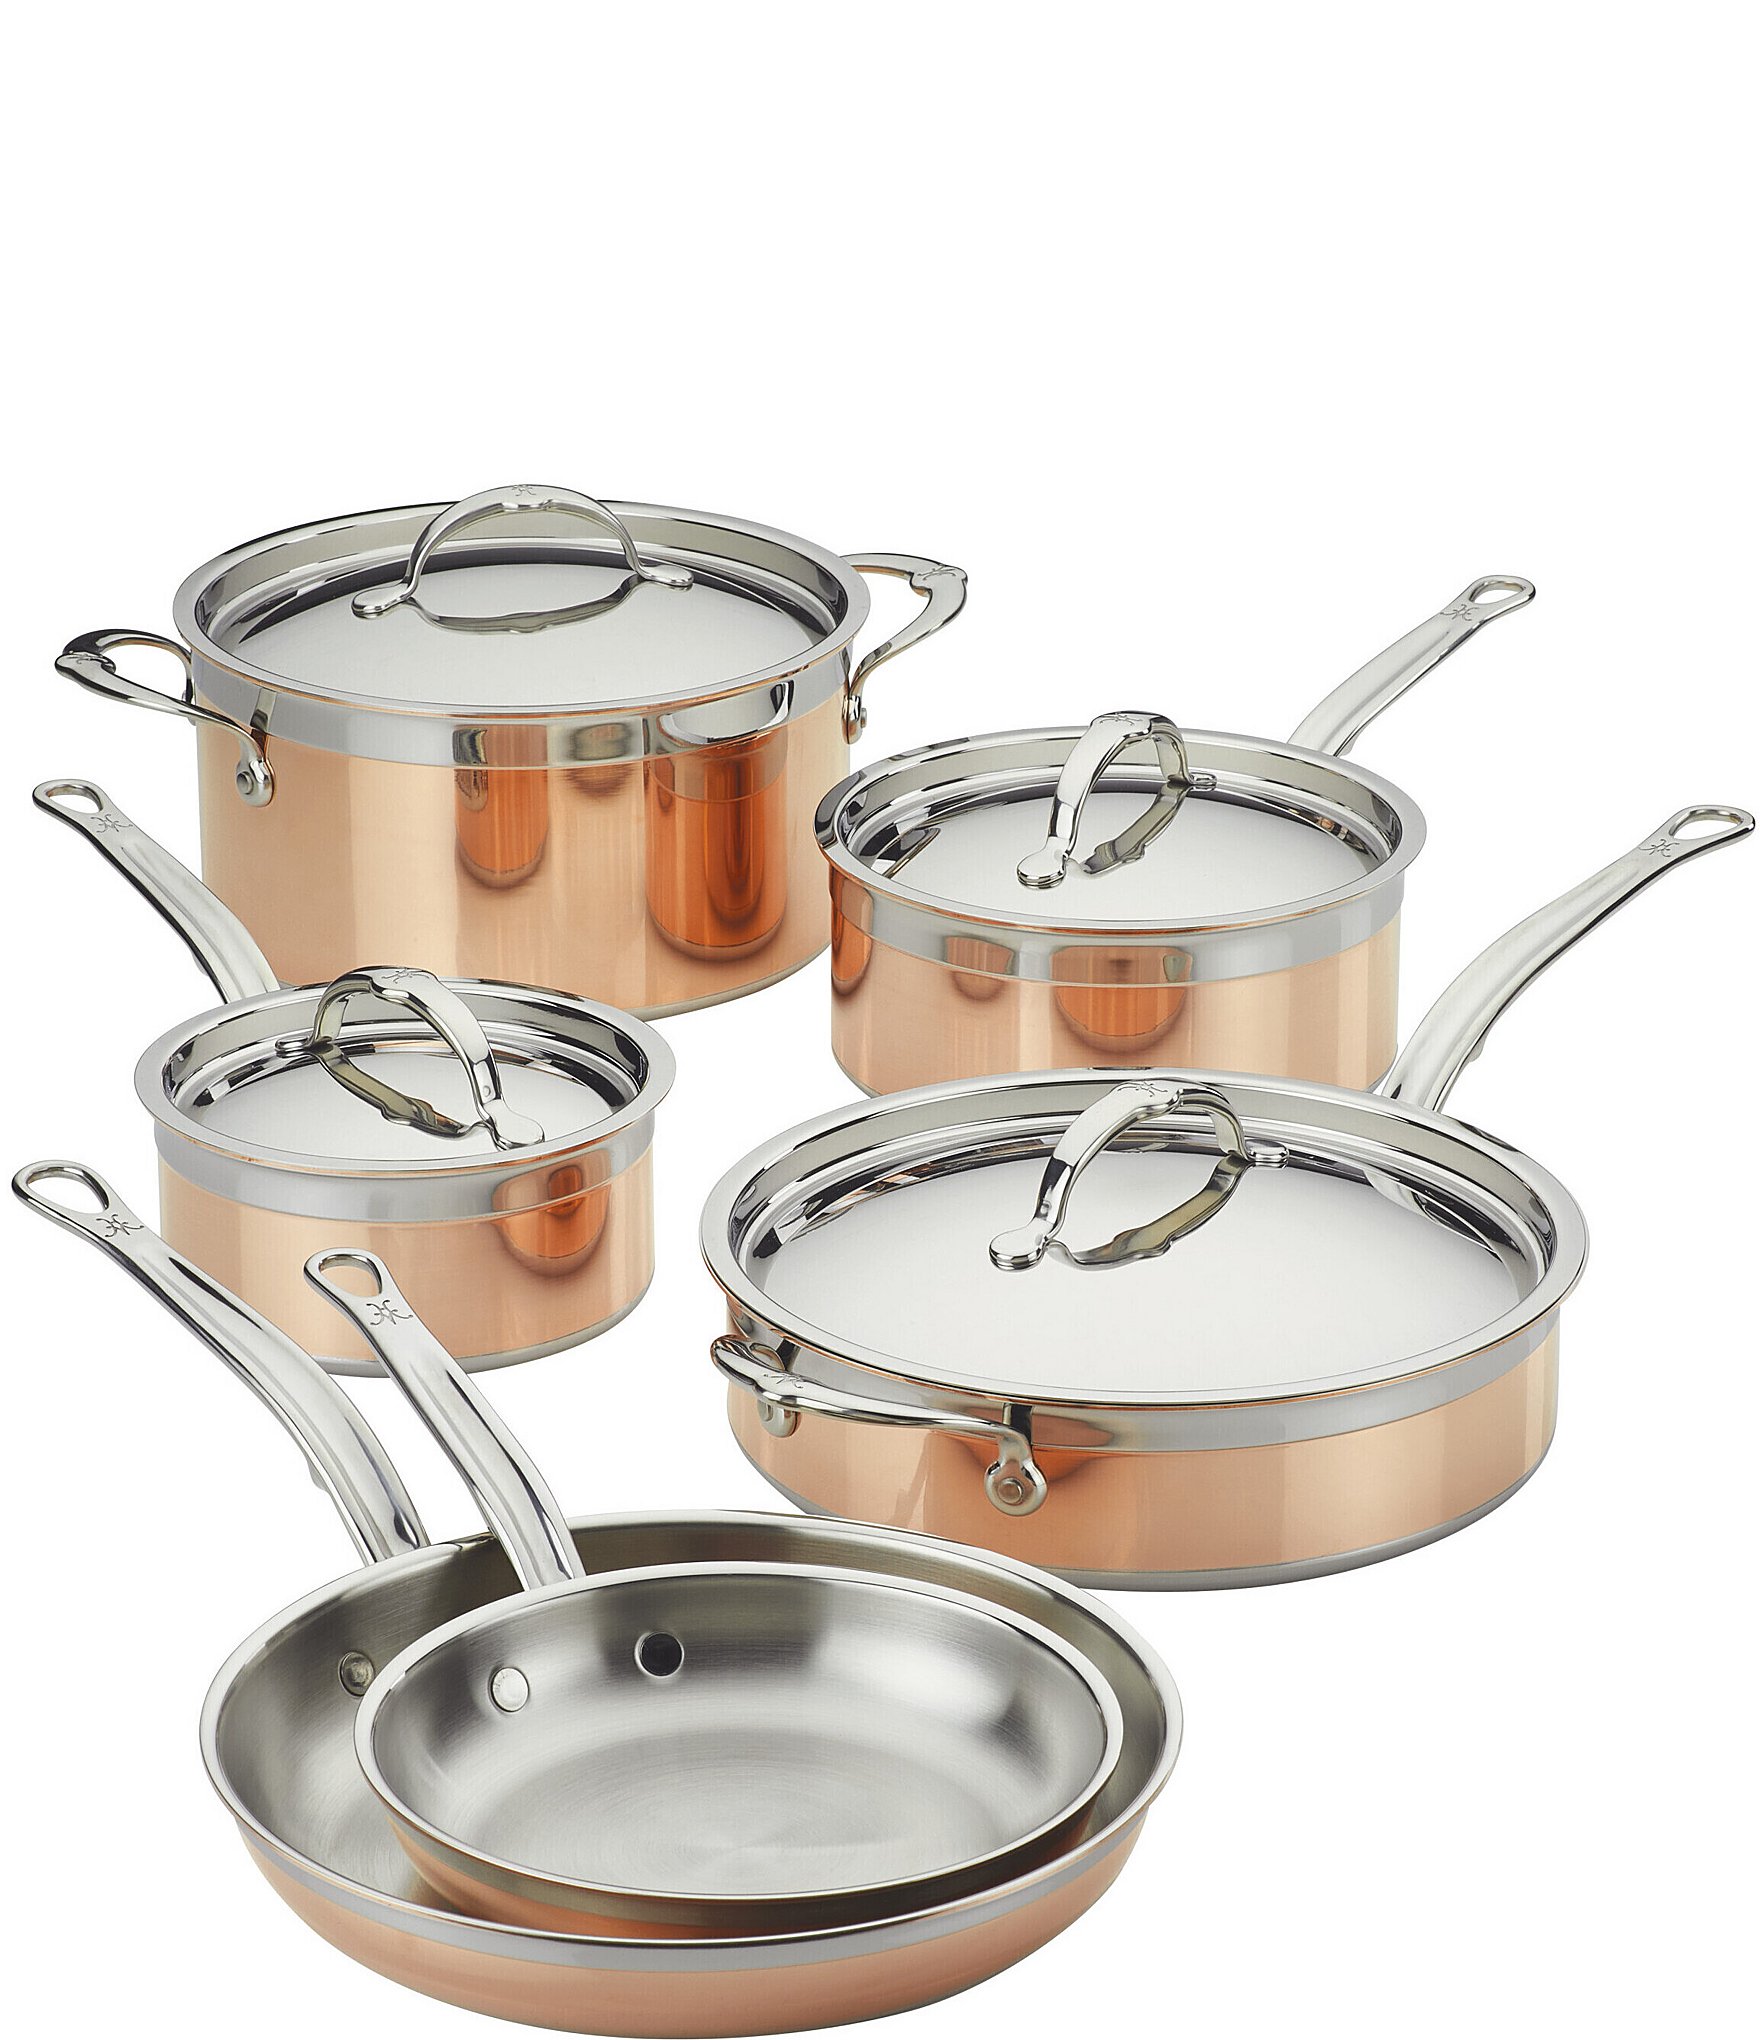 Hestan ProBond Professional Clad Stainless Steel Ultimate 10-Piece Set -  Stainless Steel - 7 requests